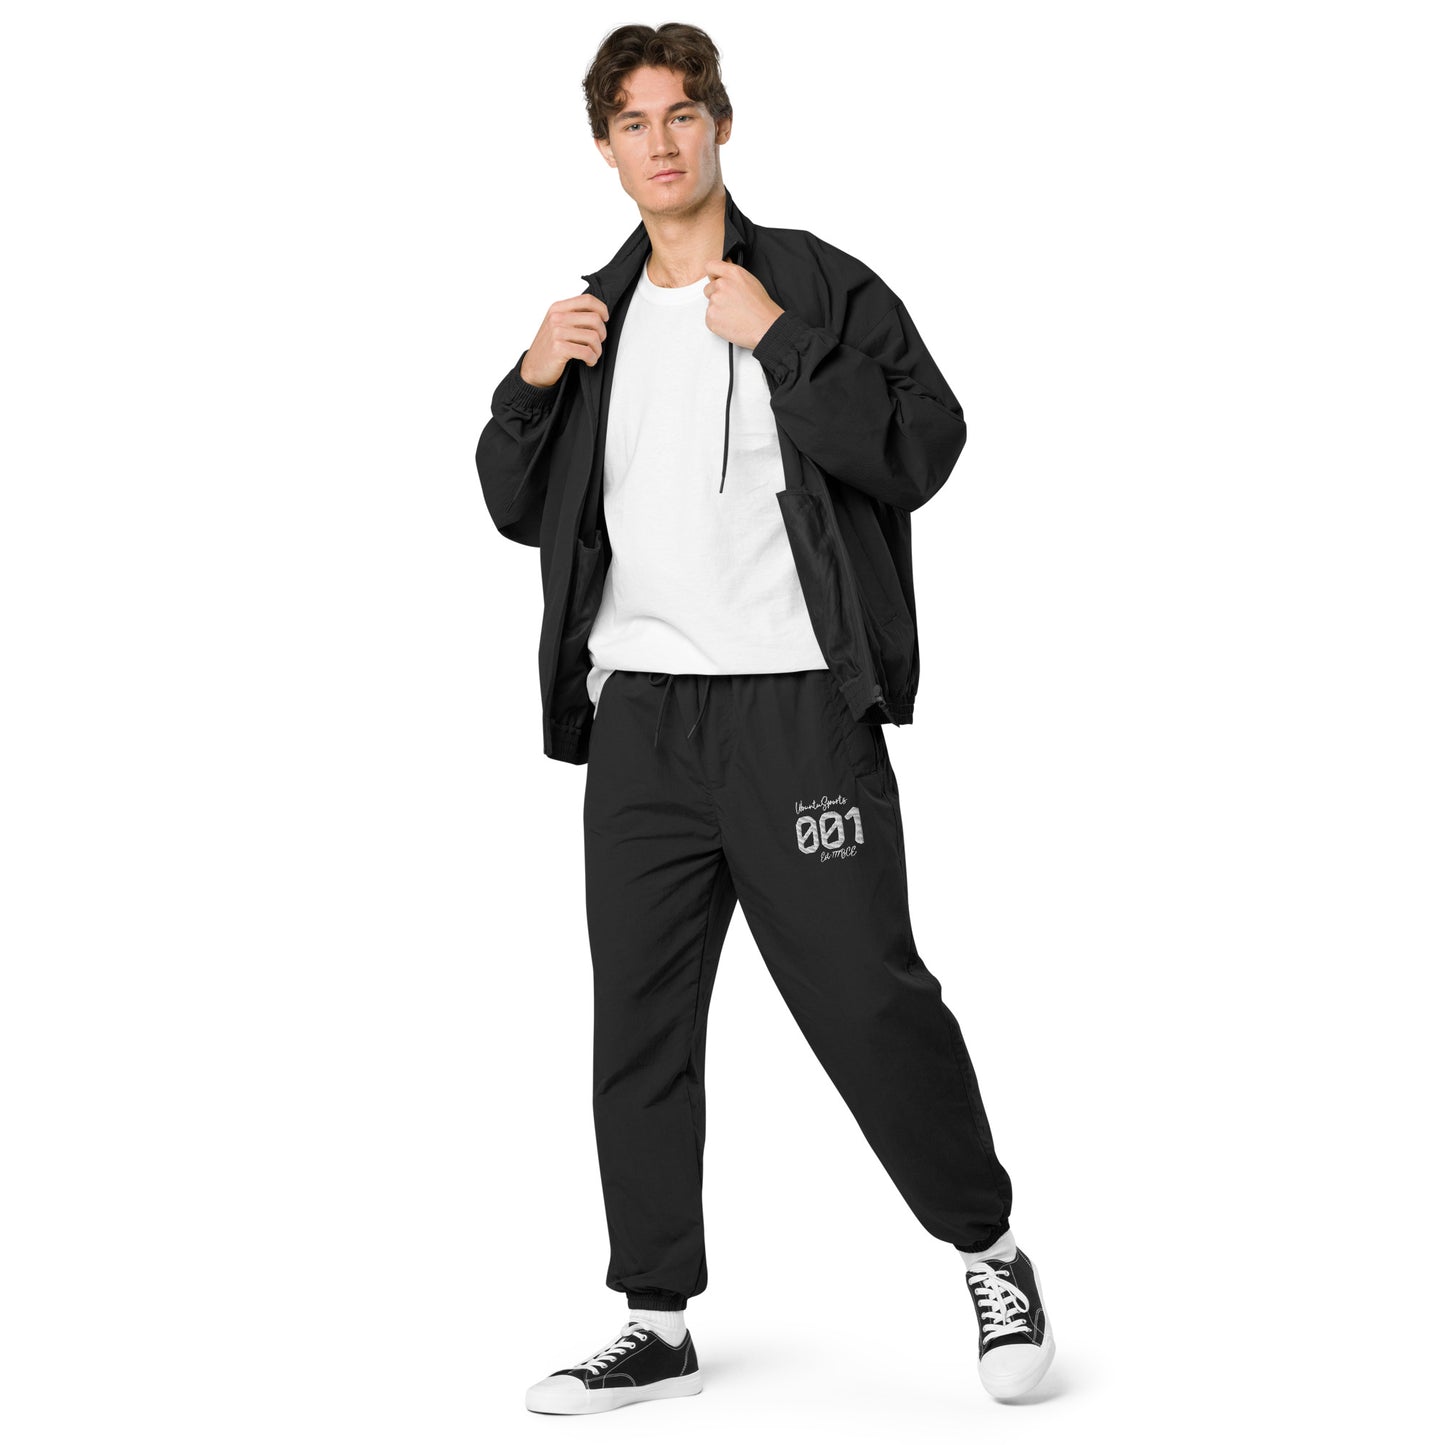 II-tracksuit trousers